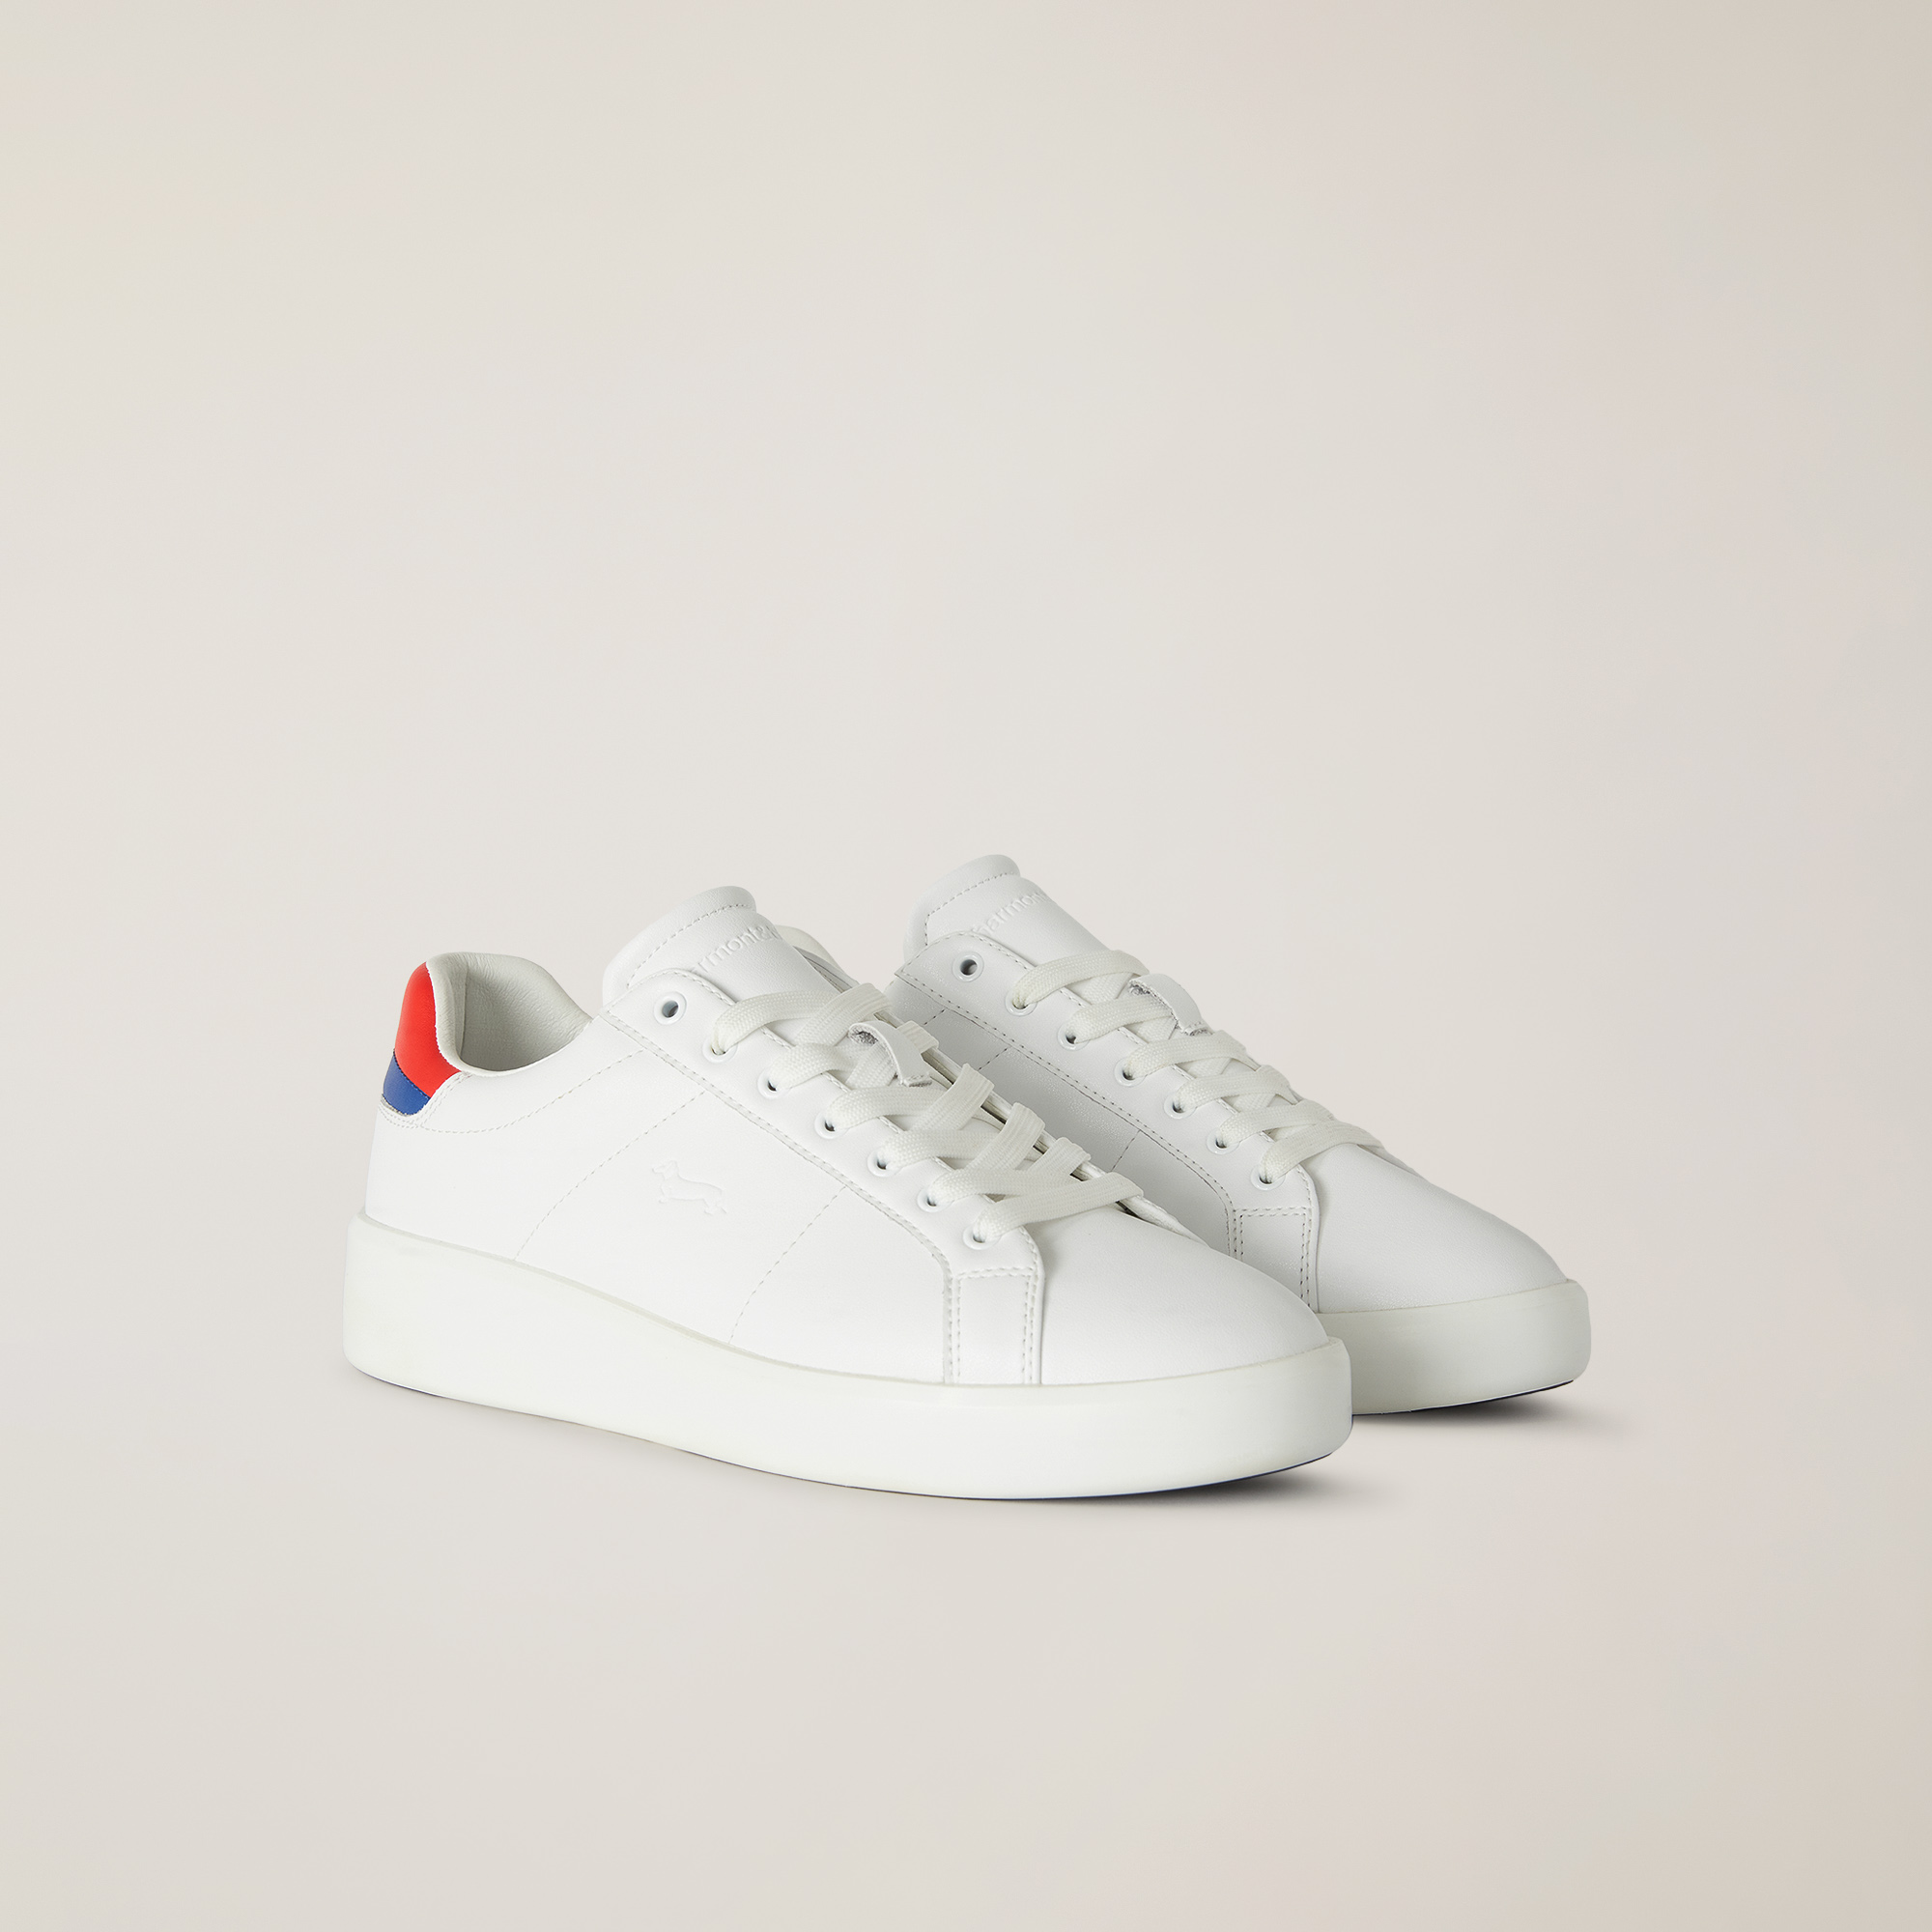 Sneaker Con Suola Oversize, Bianco/Rosso, large image number 1